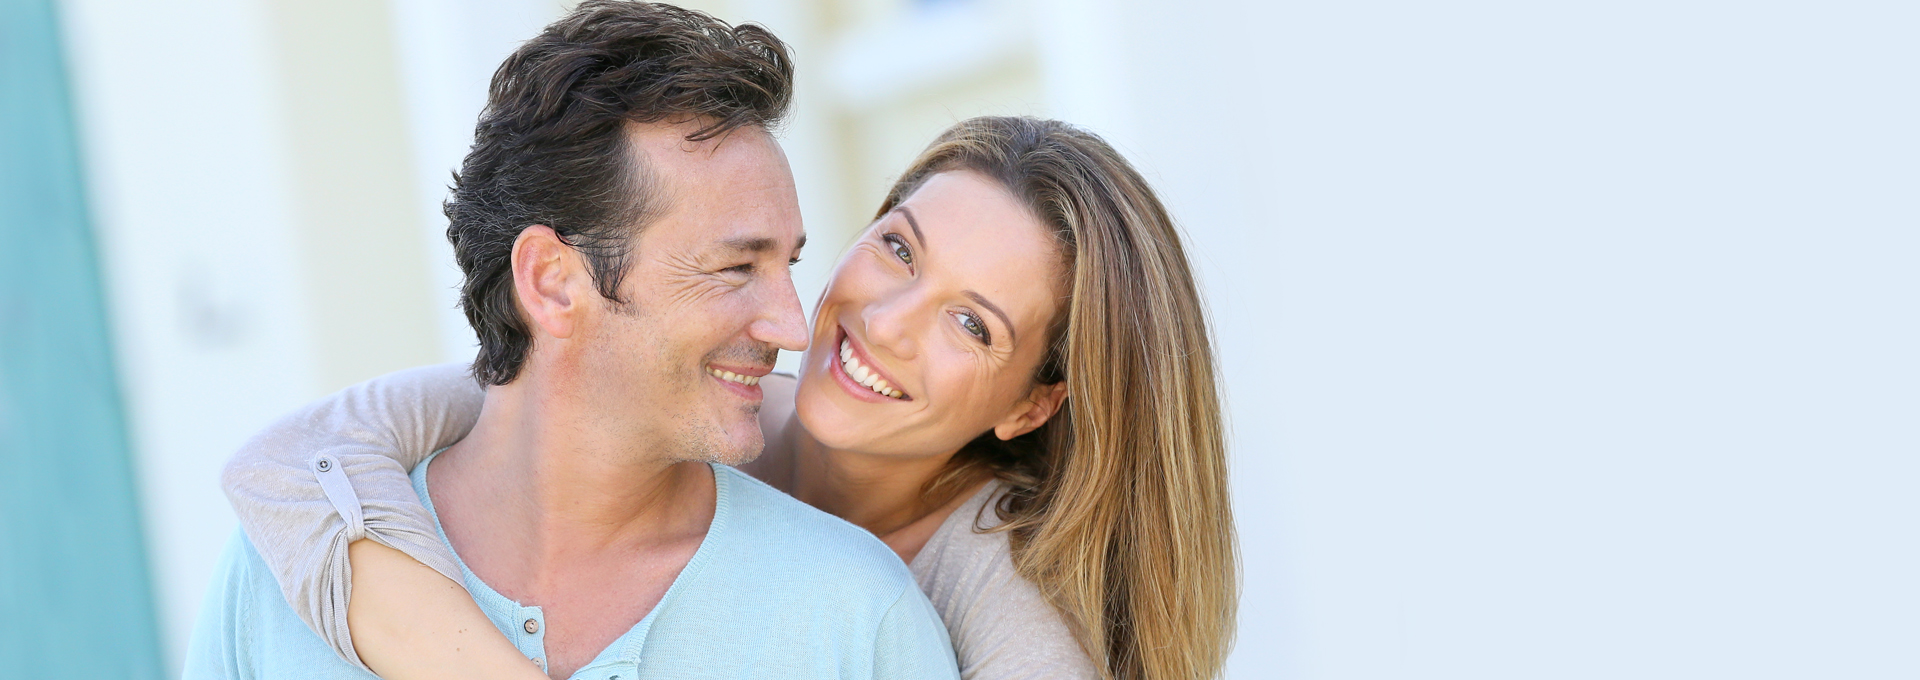 Dental Implant Surgery in Suffern